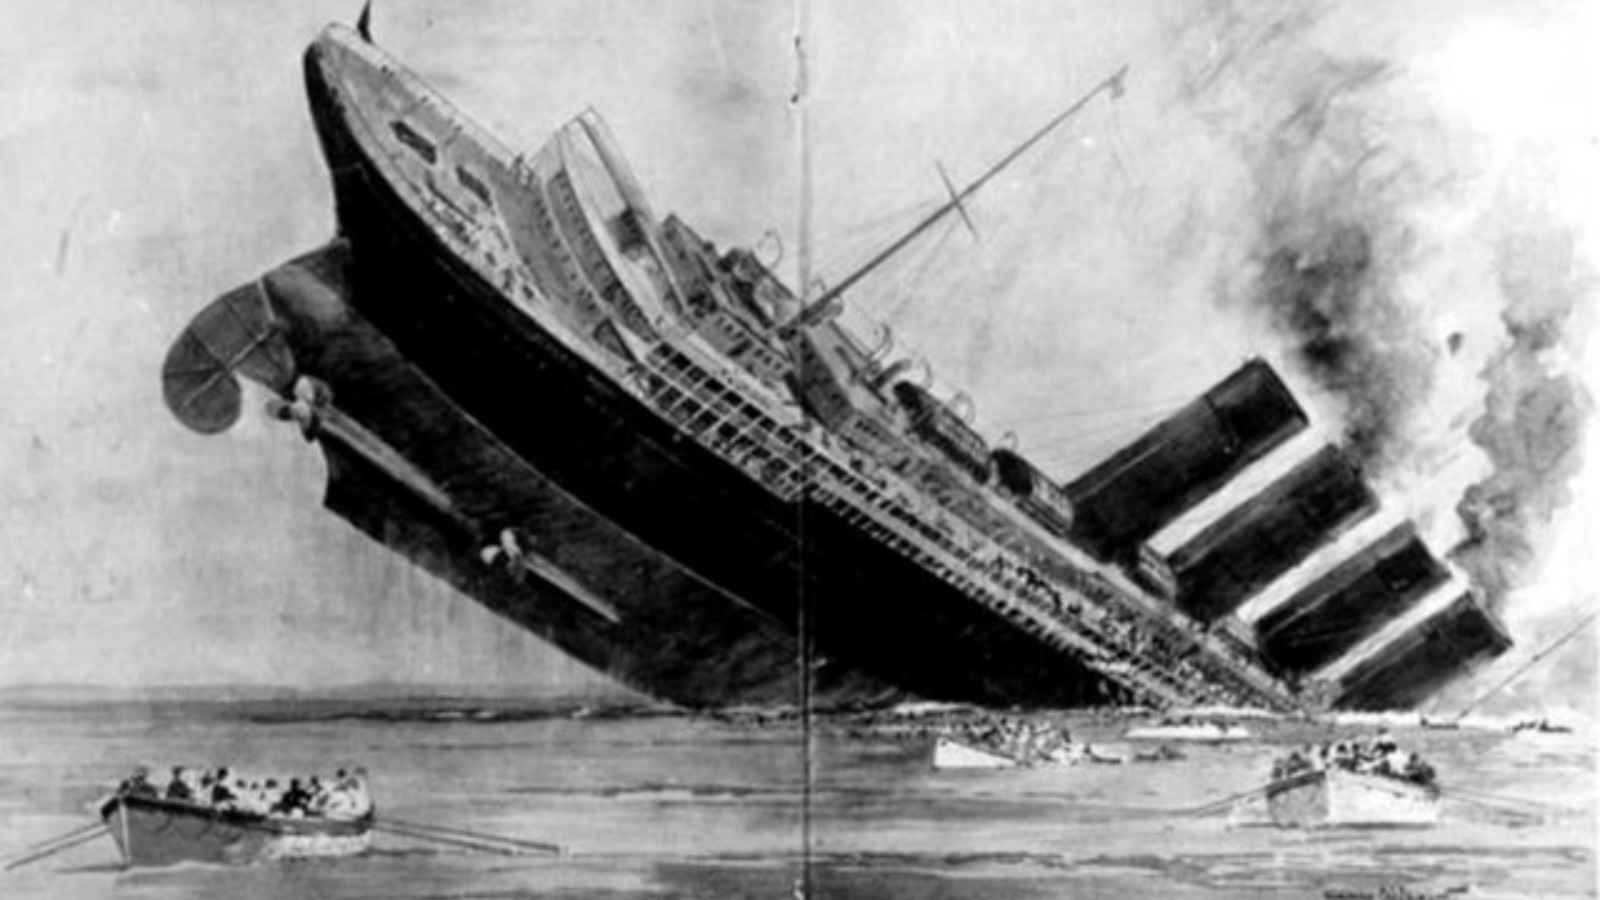 <p>In 1915, during World War I, the British ocean liner RMS Lusitania was torpedoed by a German submarine, resulting in the deaths of nearly 1,200 people. The tragedy sparked international outrage and played a significant role in the United States joining the war.</p><p>The RMS Lusitania disaster was primarily caused by the decision to sail through a known war zone, despite warnings from the British government. It also highlighted the dangers of <a href="https://frenzhub.com/the-best-carnival-cruise-ships/">passenger ships</a> being used for wartime purposes.</p>